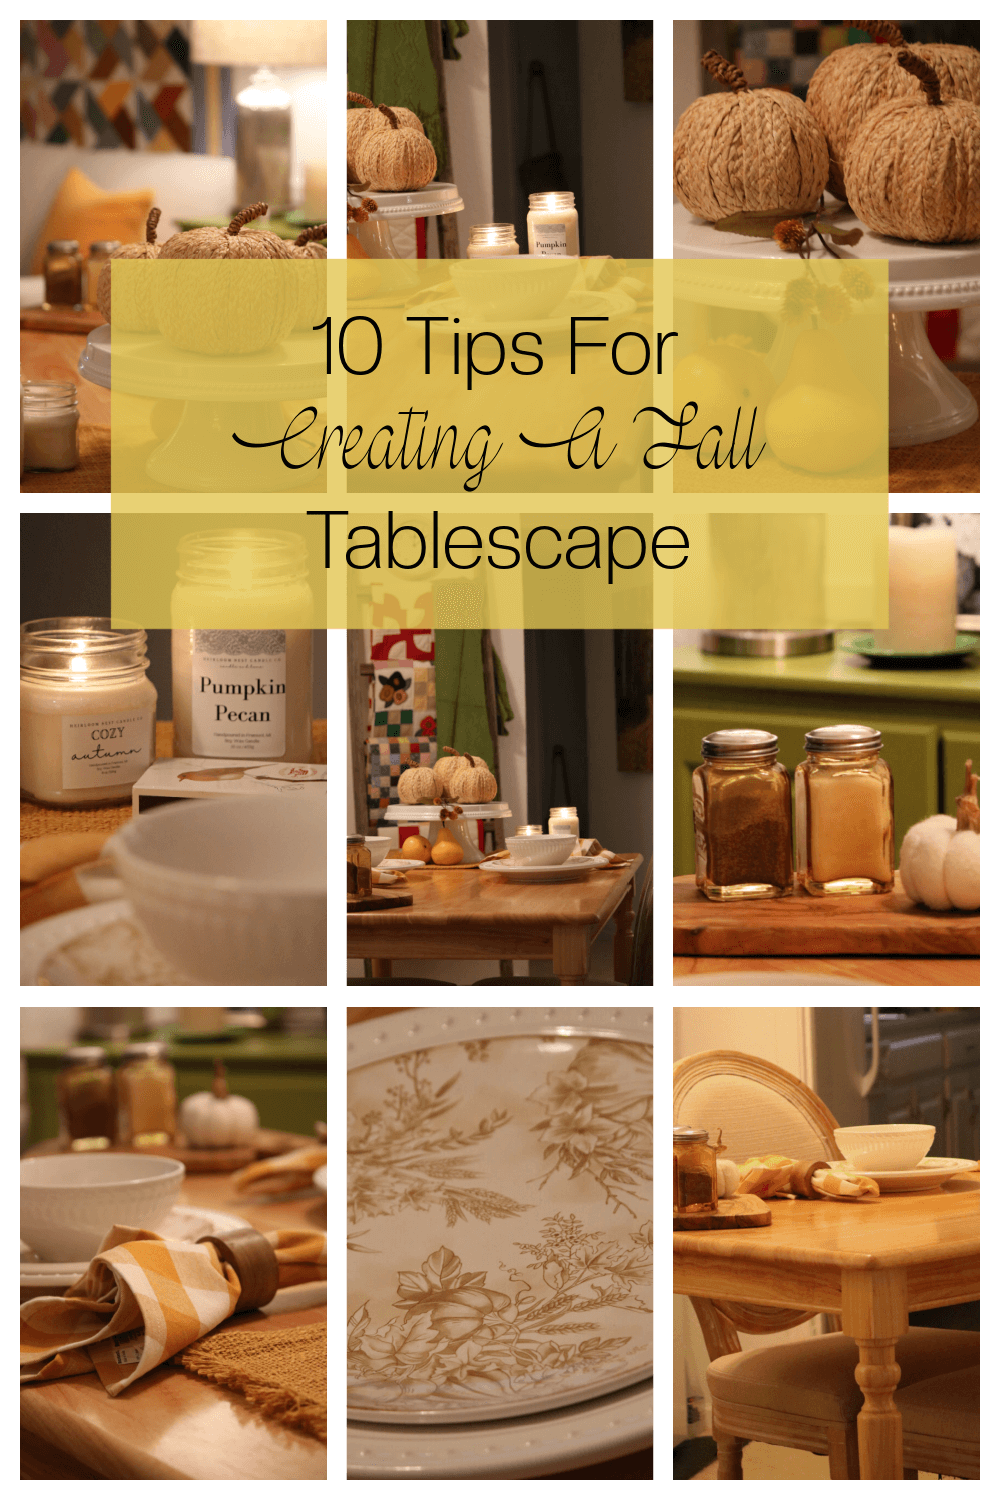 10 Tips For Creating A Fall Tablescape